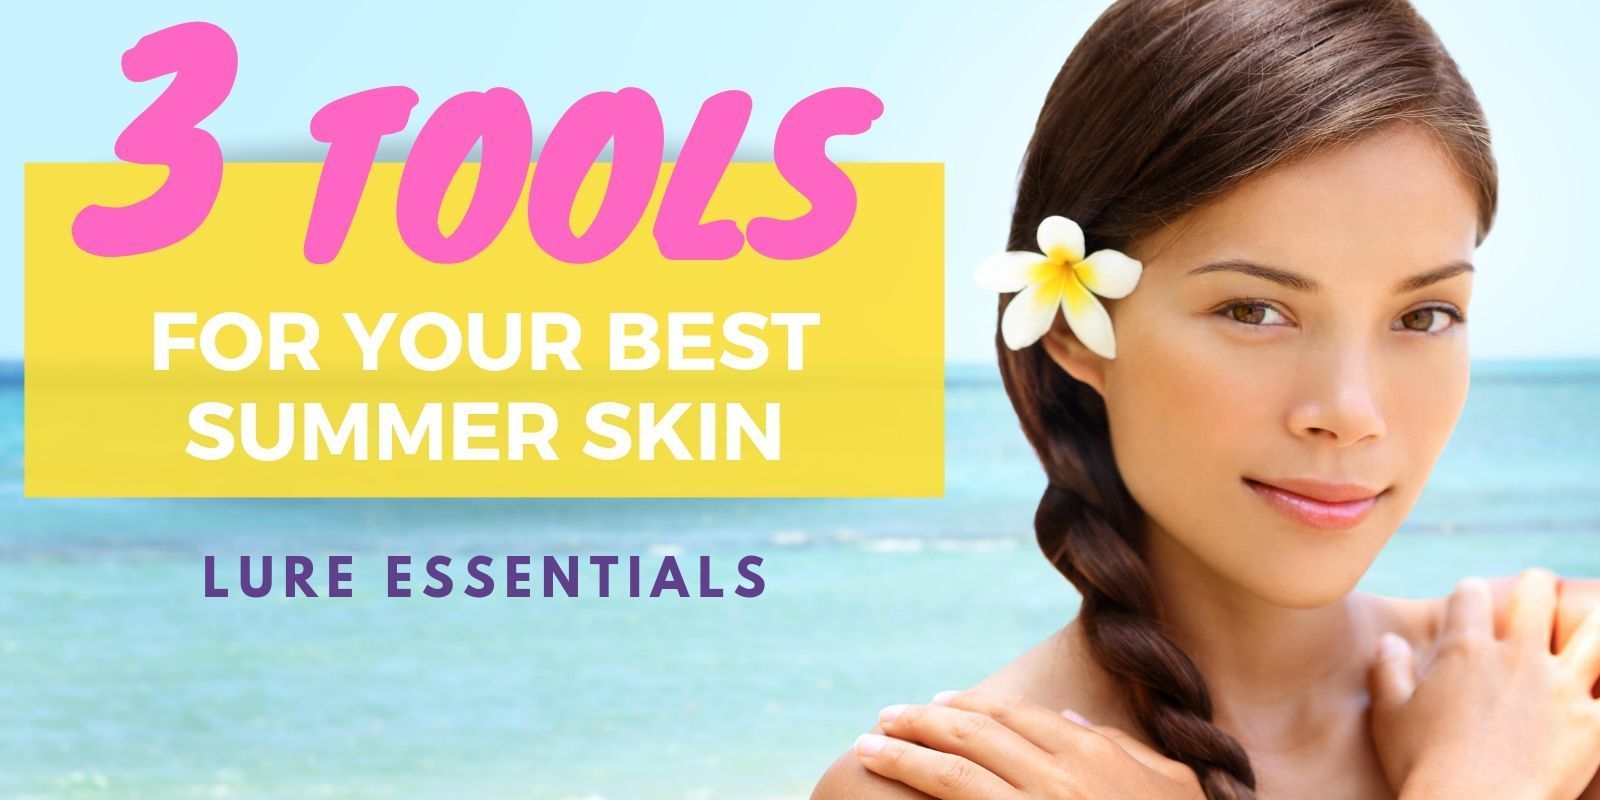 Three Tools for Your Best Summer Skin - Lure Essentials